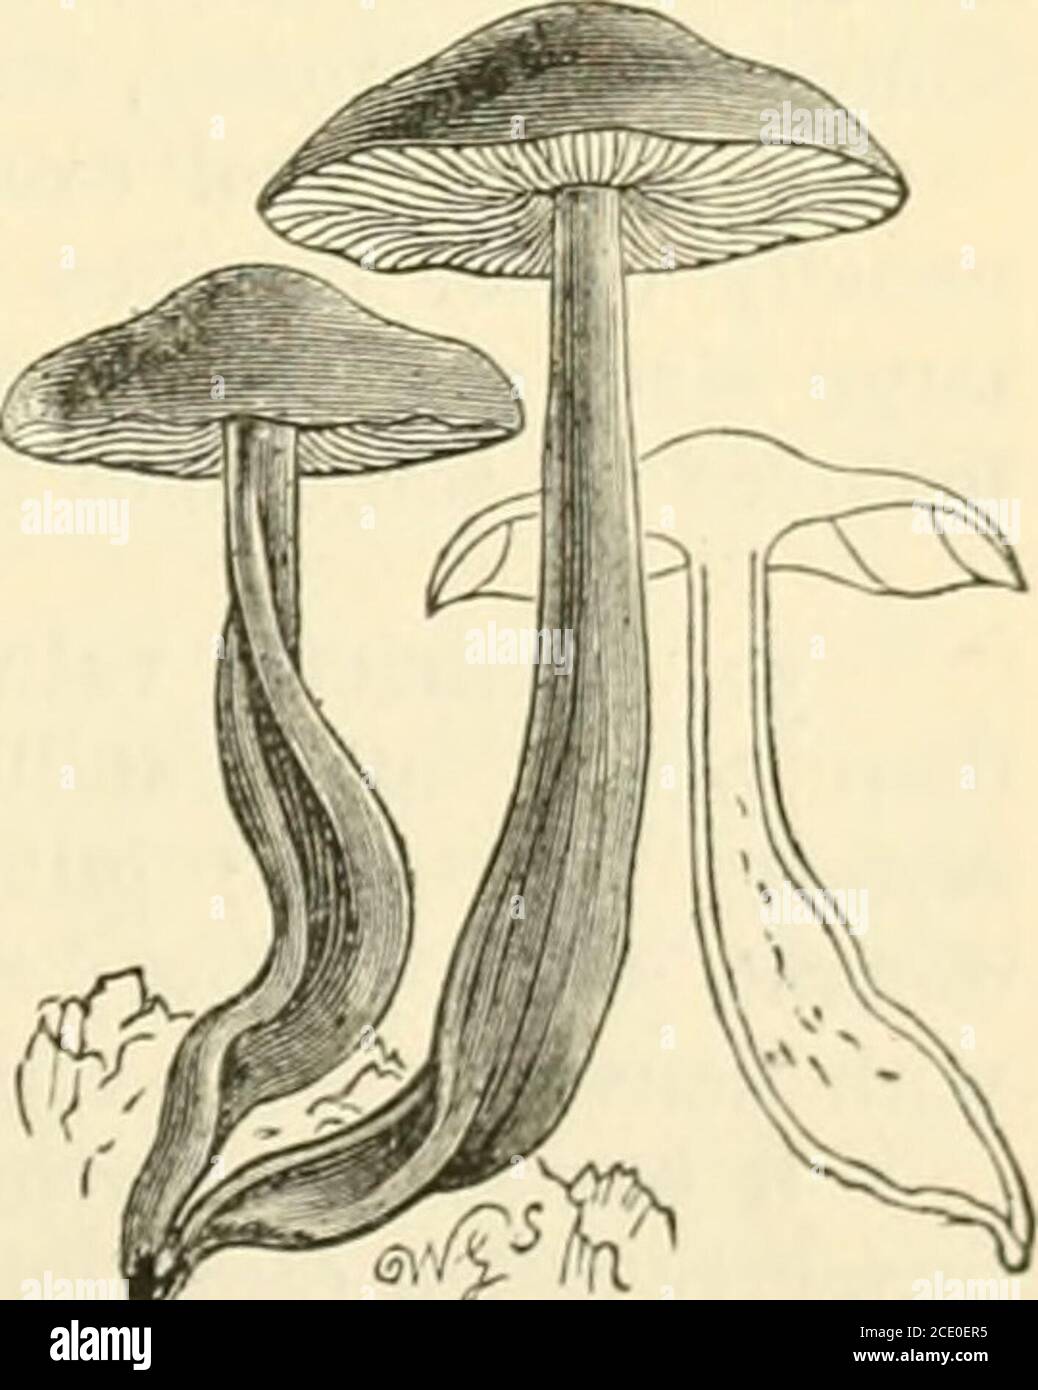 . Guide to Sowerby's models of British fungi in the Department of Botany, British Museum (Natural History) . °-involute; the stem is hollow, with a distinct. -Type form of Colly-Agaricus fusipes Bull,(One-quarter natural size.) cartilaginous bark; the gills are free or obtusely adnexed. 27. Agaricus radicatus Relh.—Pileus brown, flattened, more orless umbonate, often irregular, glutinous, wrinkled, and seldom more 18 GUIDE TO THE MODELS OF FUNGI. than 2| in. in diameter; gills adnato-sinuate, broad, thick, distant,shining white; the stalk is six inches or more long, pale brown,straight, rigid, Stock Photo